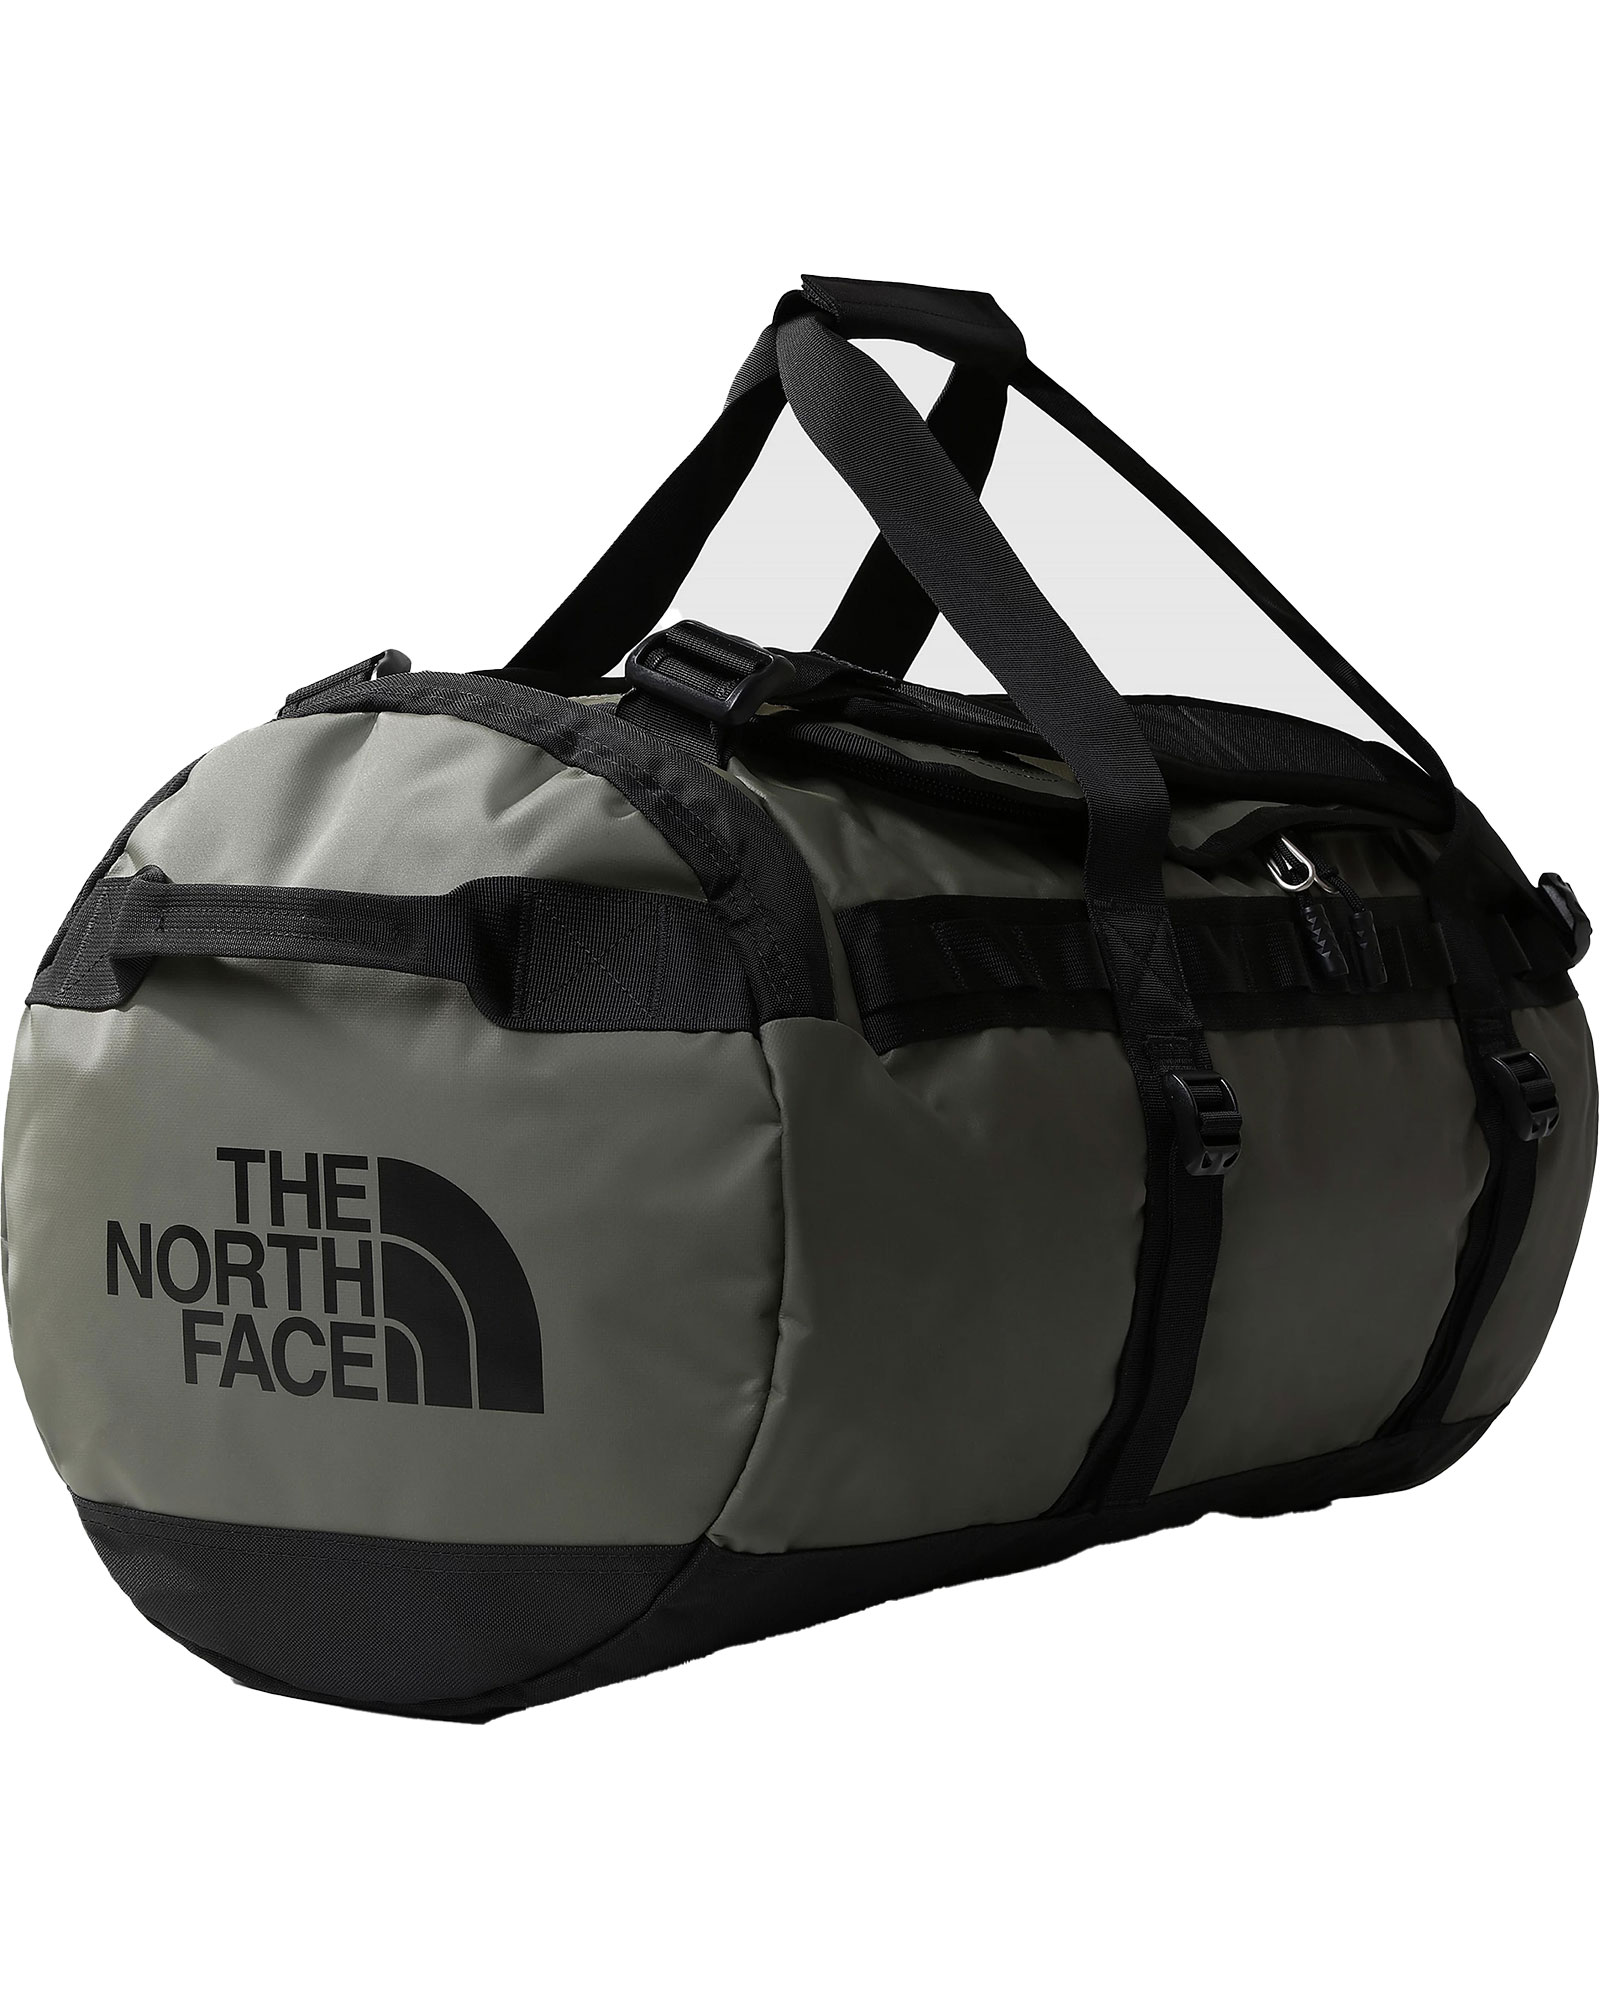 The North Face Base Camp Duffel Medium 71L - New Taupe Green/TNF Black